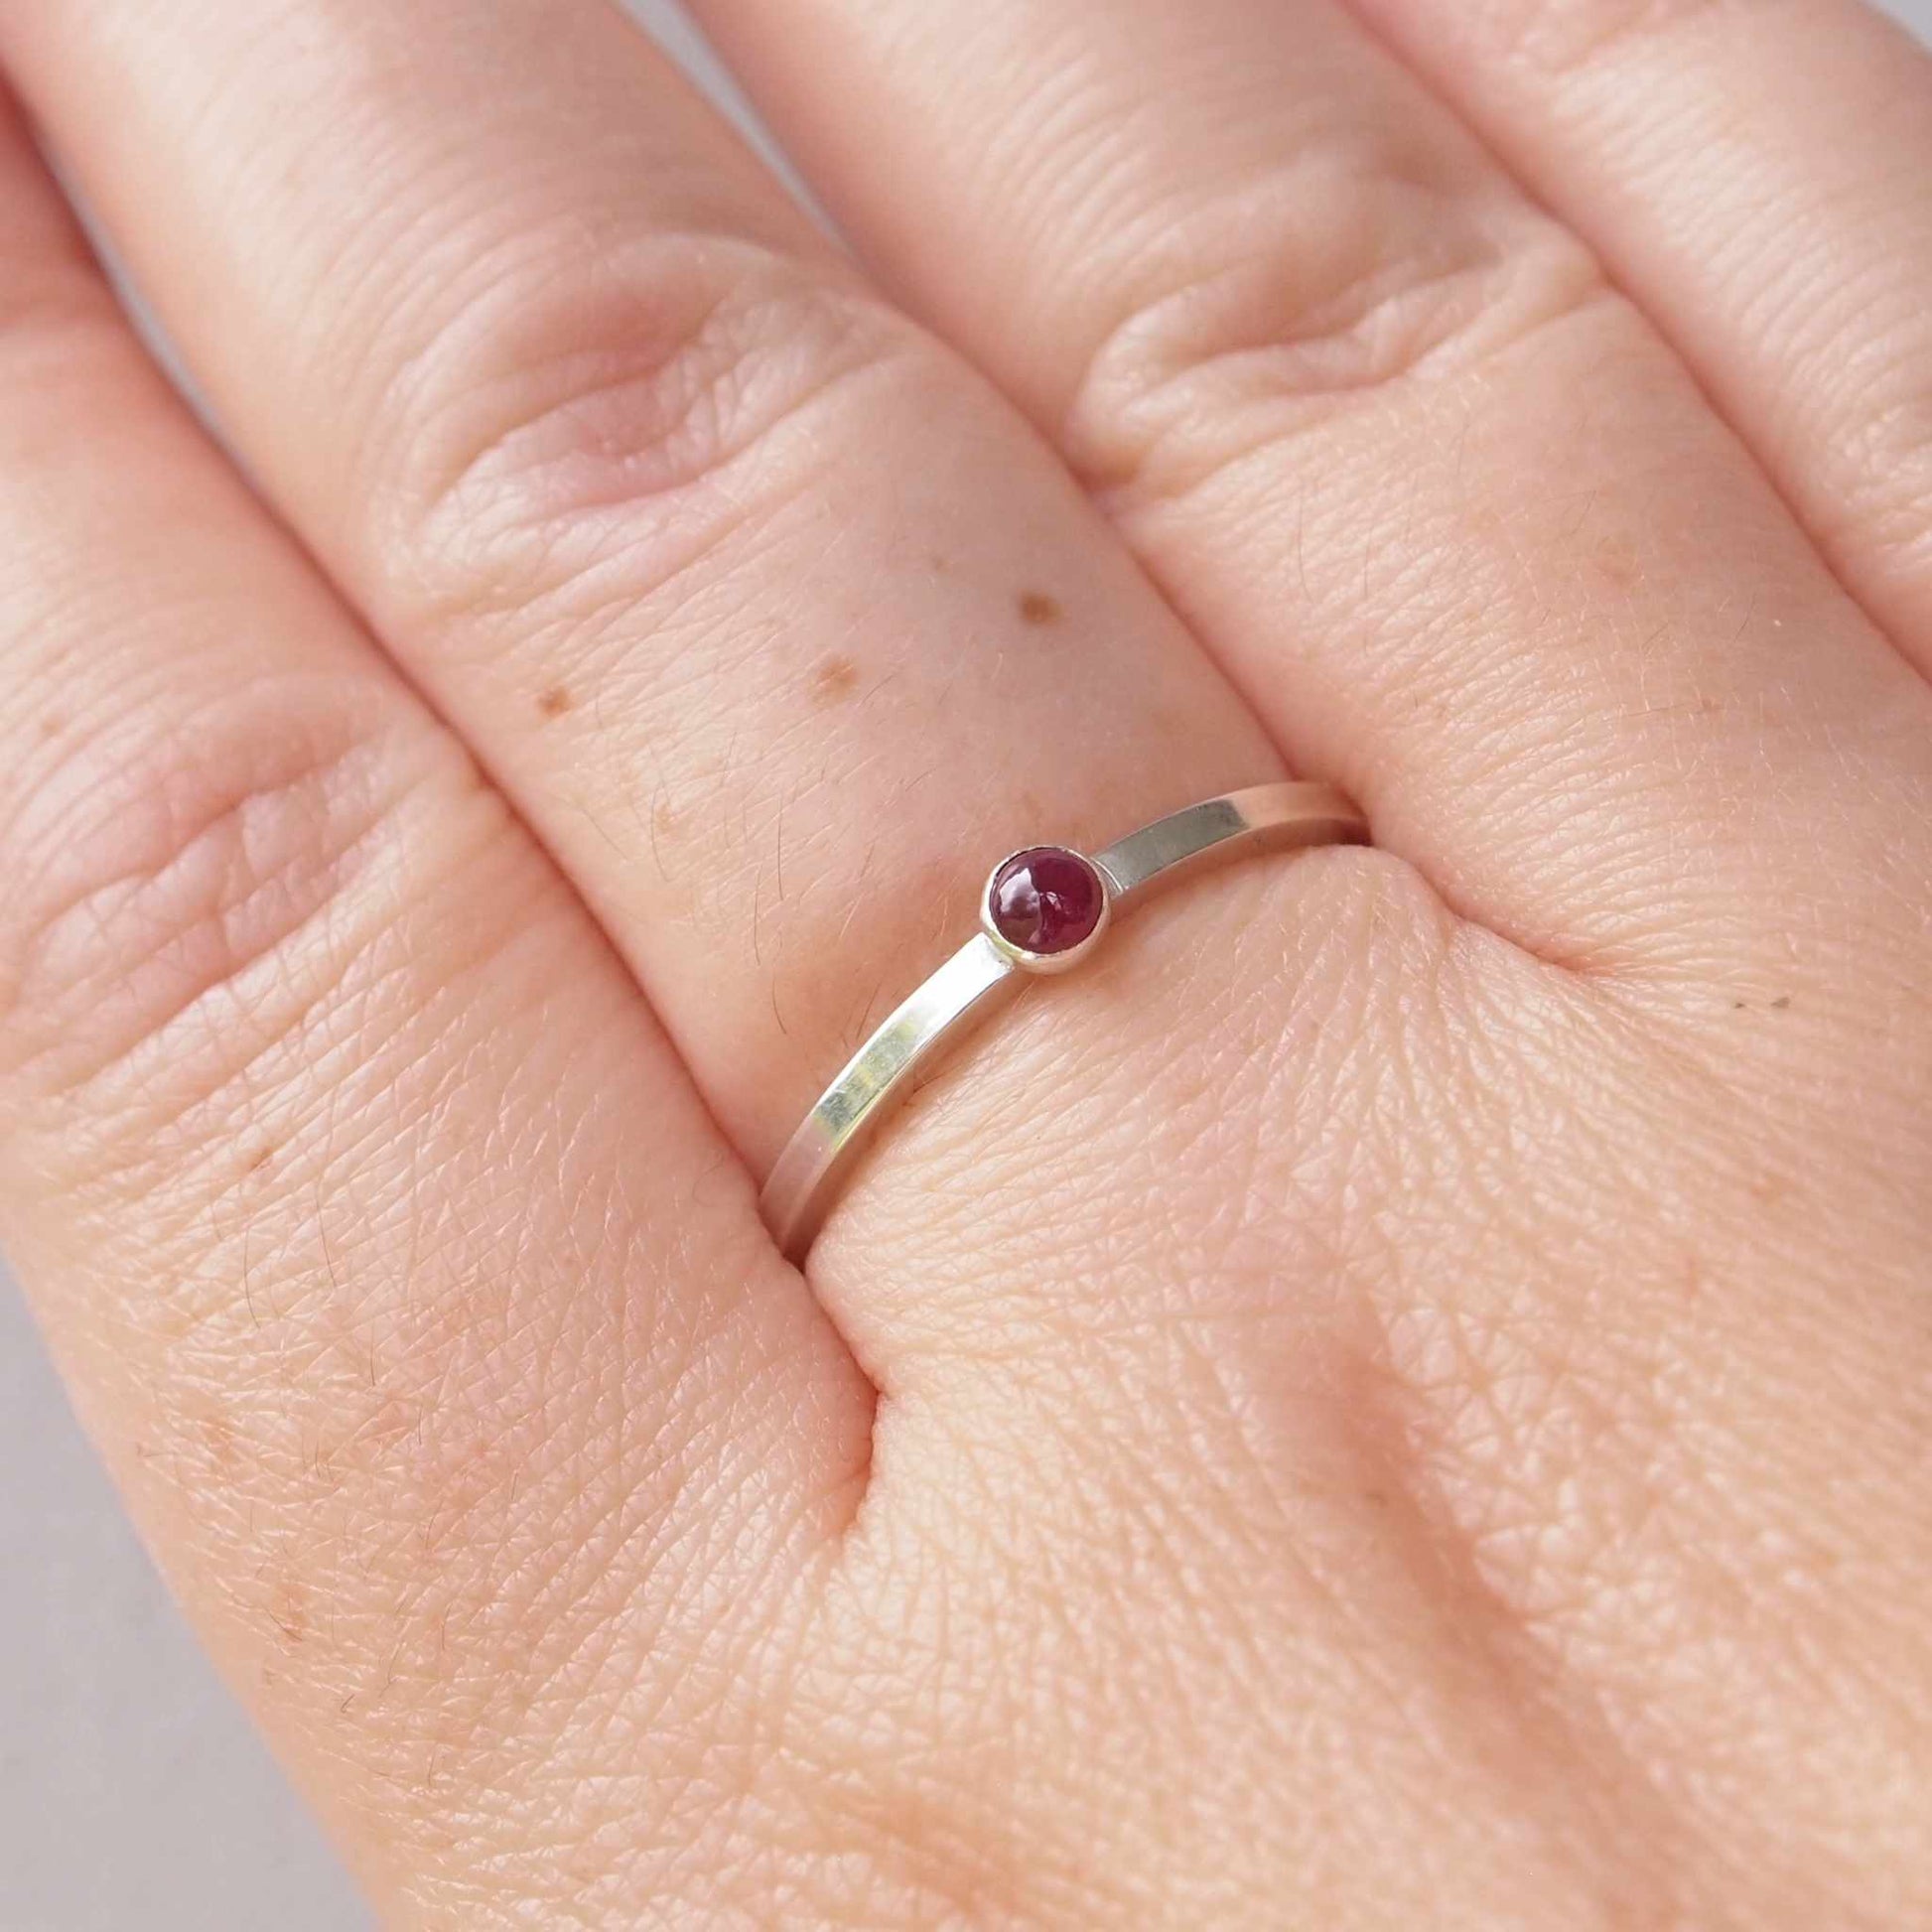 Ruby and Sterling Silver Birthstone Ring for July. The ring is simple in style on a plain square profile band with a small round Ruby in the centre. The ring is handmade to your size by maram jewellery in Scotland